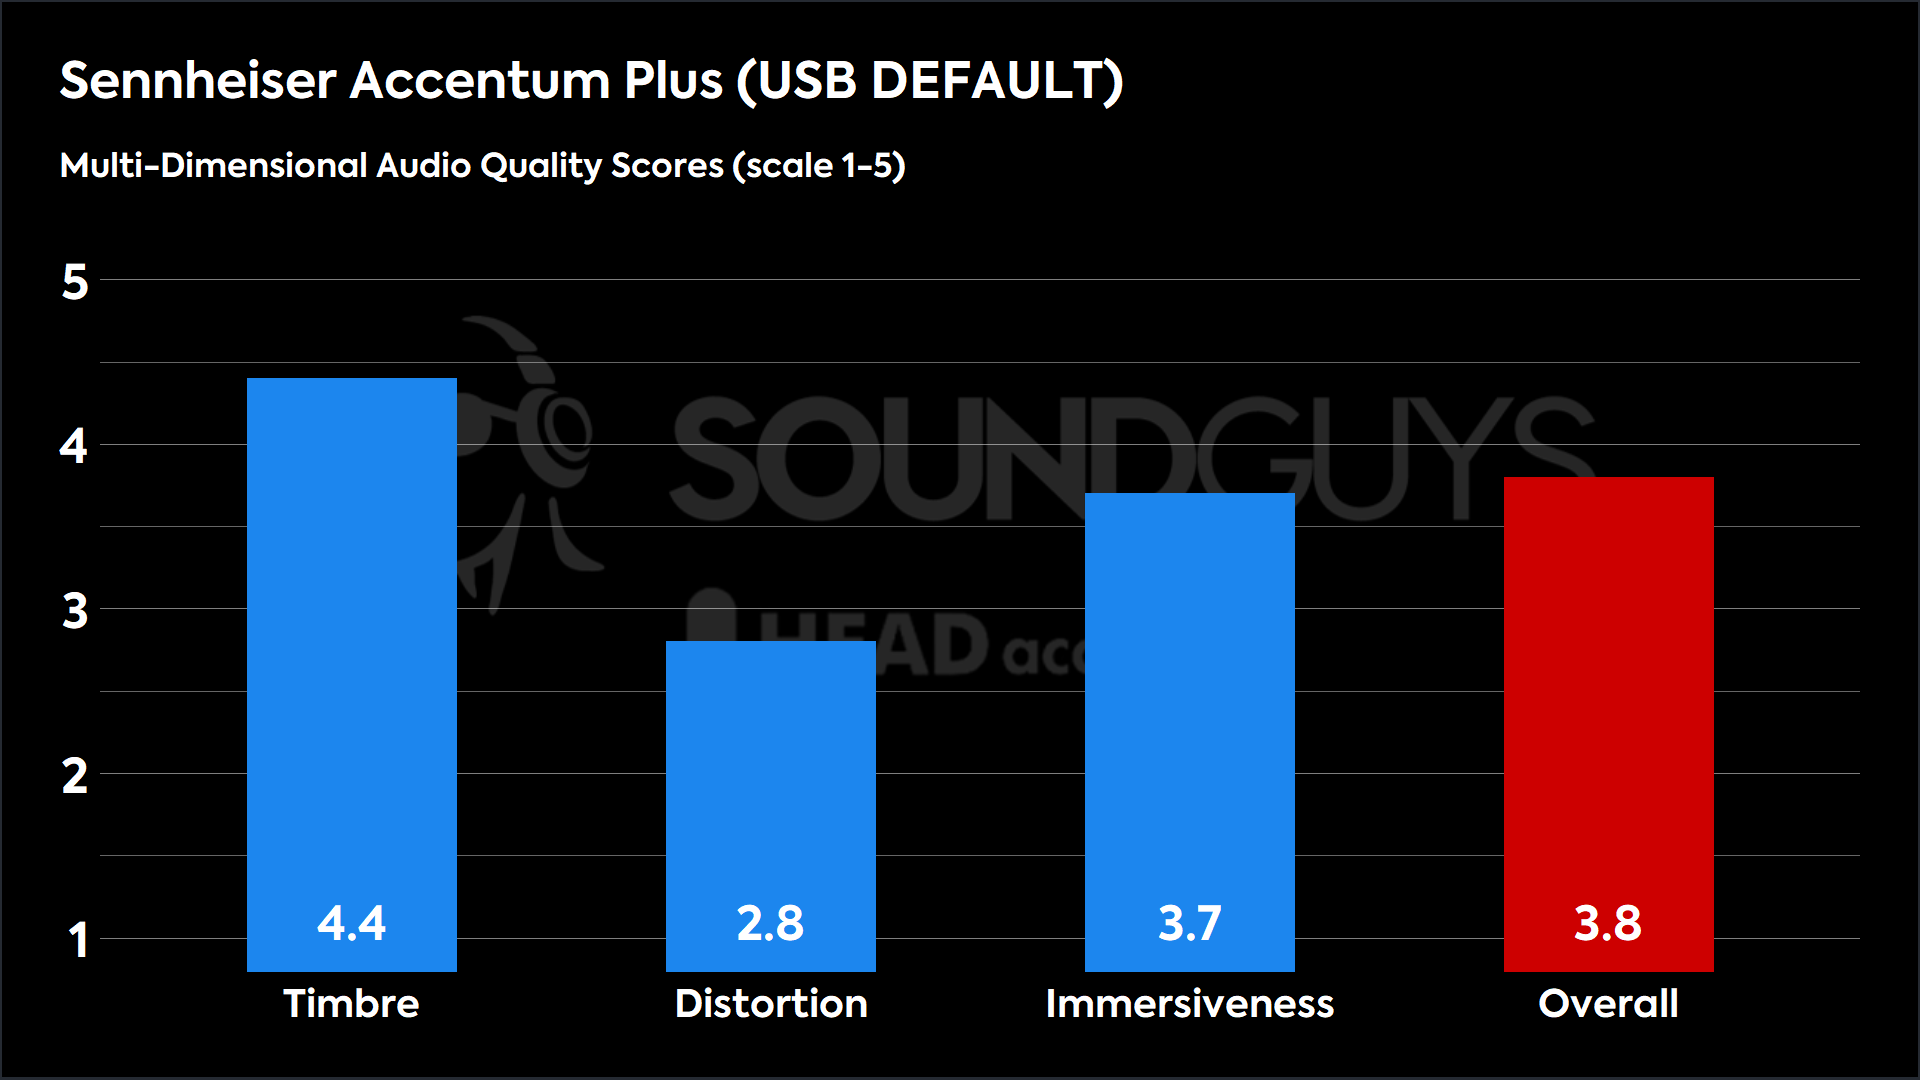 This chart shows the MDAQS results for the Sennheiser Accentum Plus in USB DEFAULT mode. The Timbre score is 4.4, The Distortion score is 2.8, the Immersiveness score is 3.7, and the Overall Score is 3.8 )